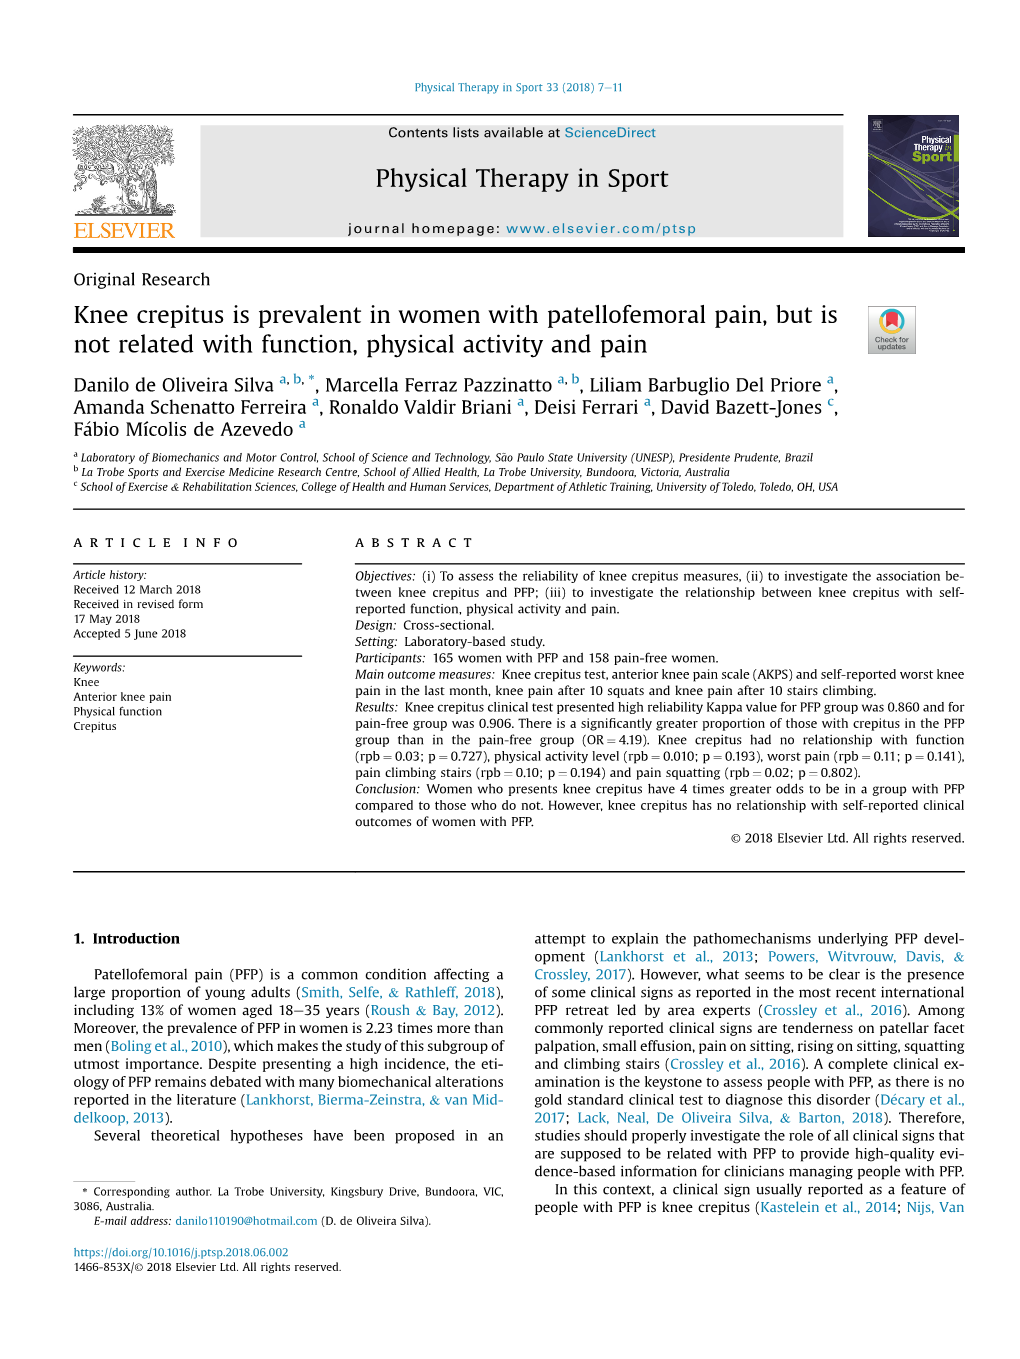 Knee Crepitus Is Prevalent in Women with Patellofemoral Pain, but Is Not Related with Function, Physical Activity and Pain